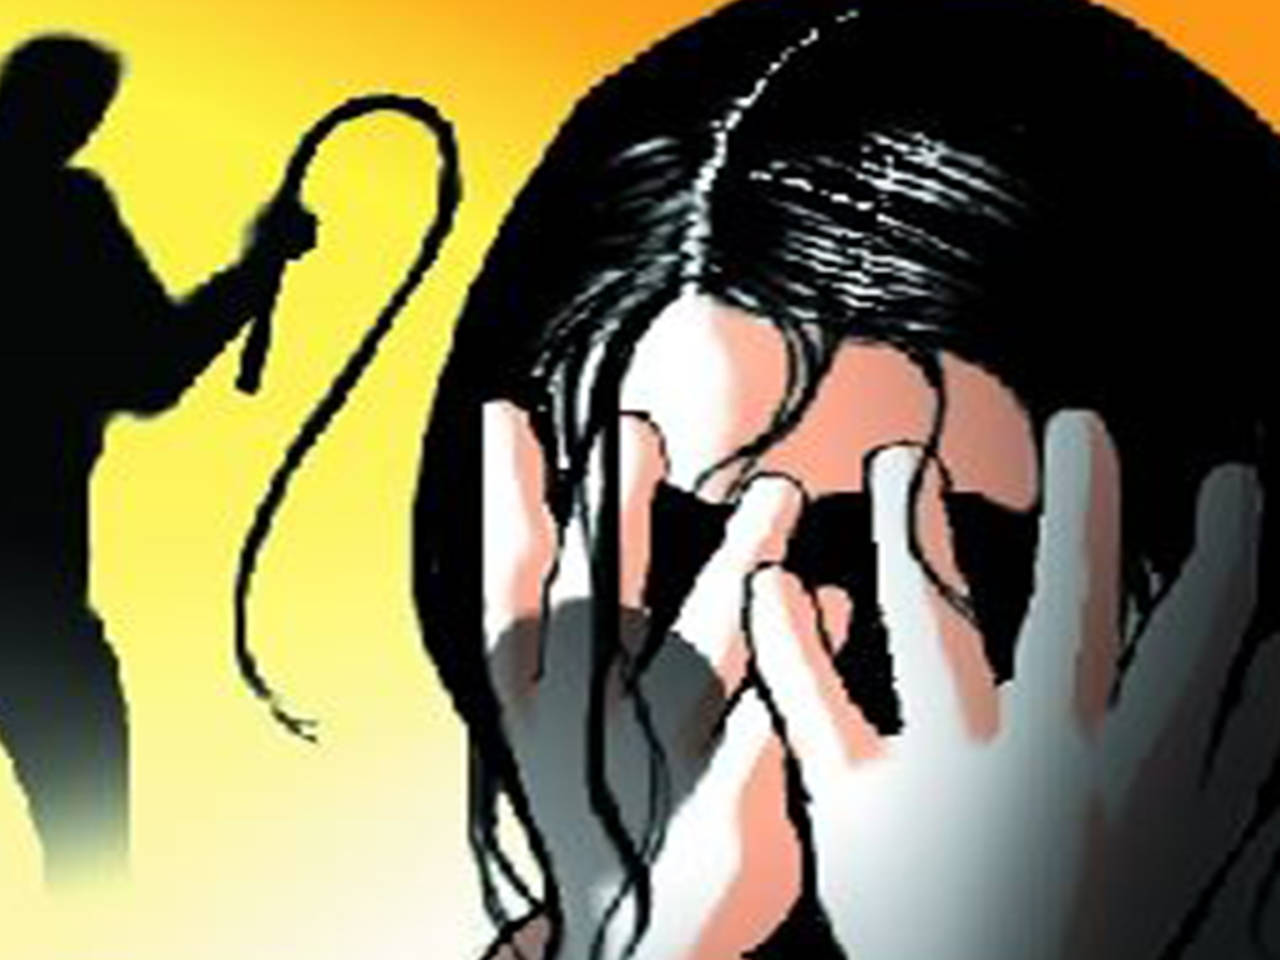 Wife beaten up by husband as she declined sex on wedding night in Ahmedabad Ahmedabad News image pic image